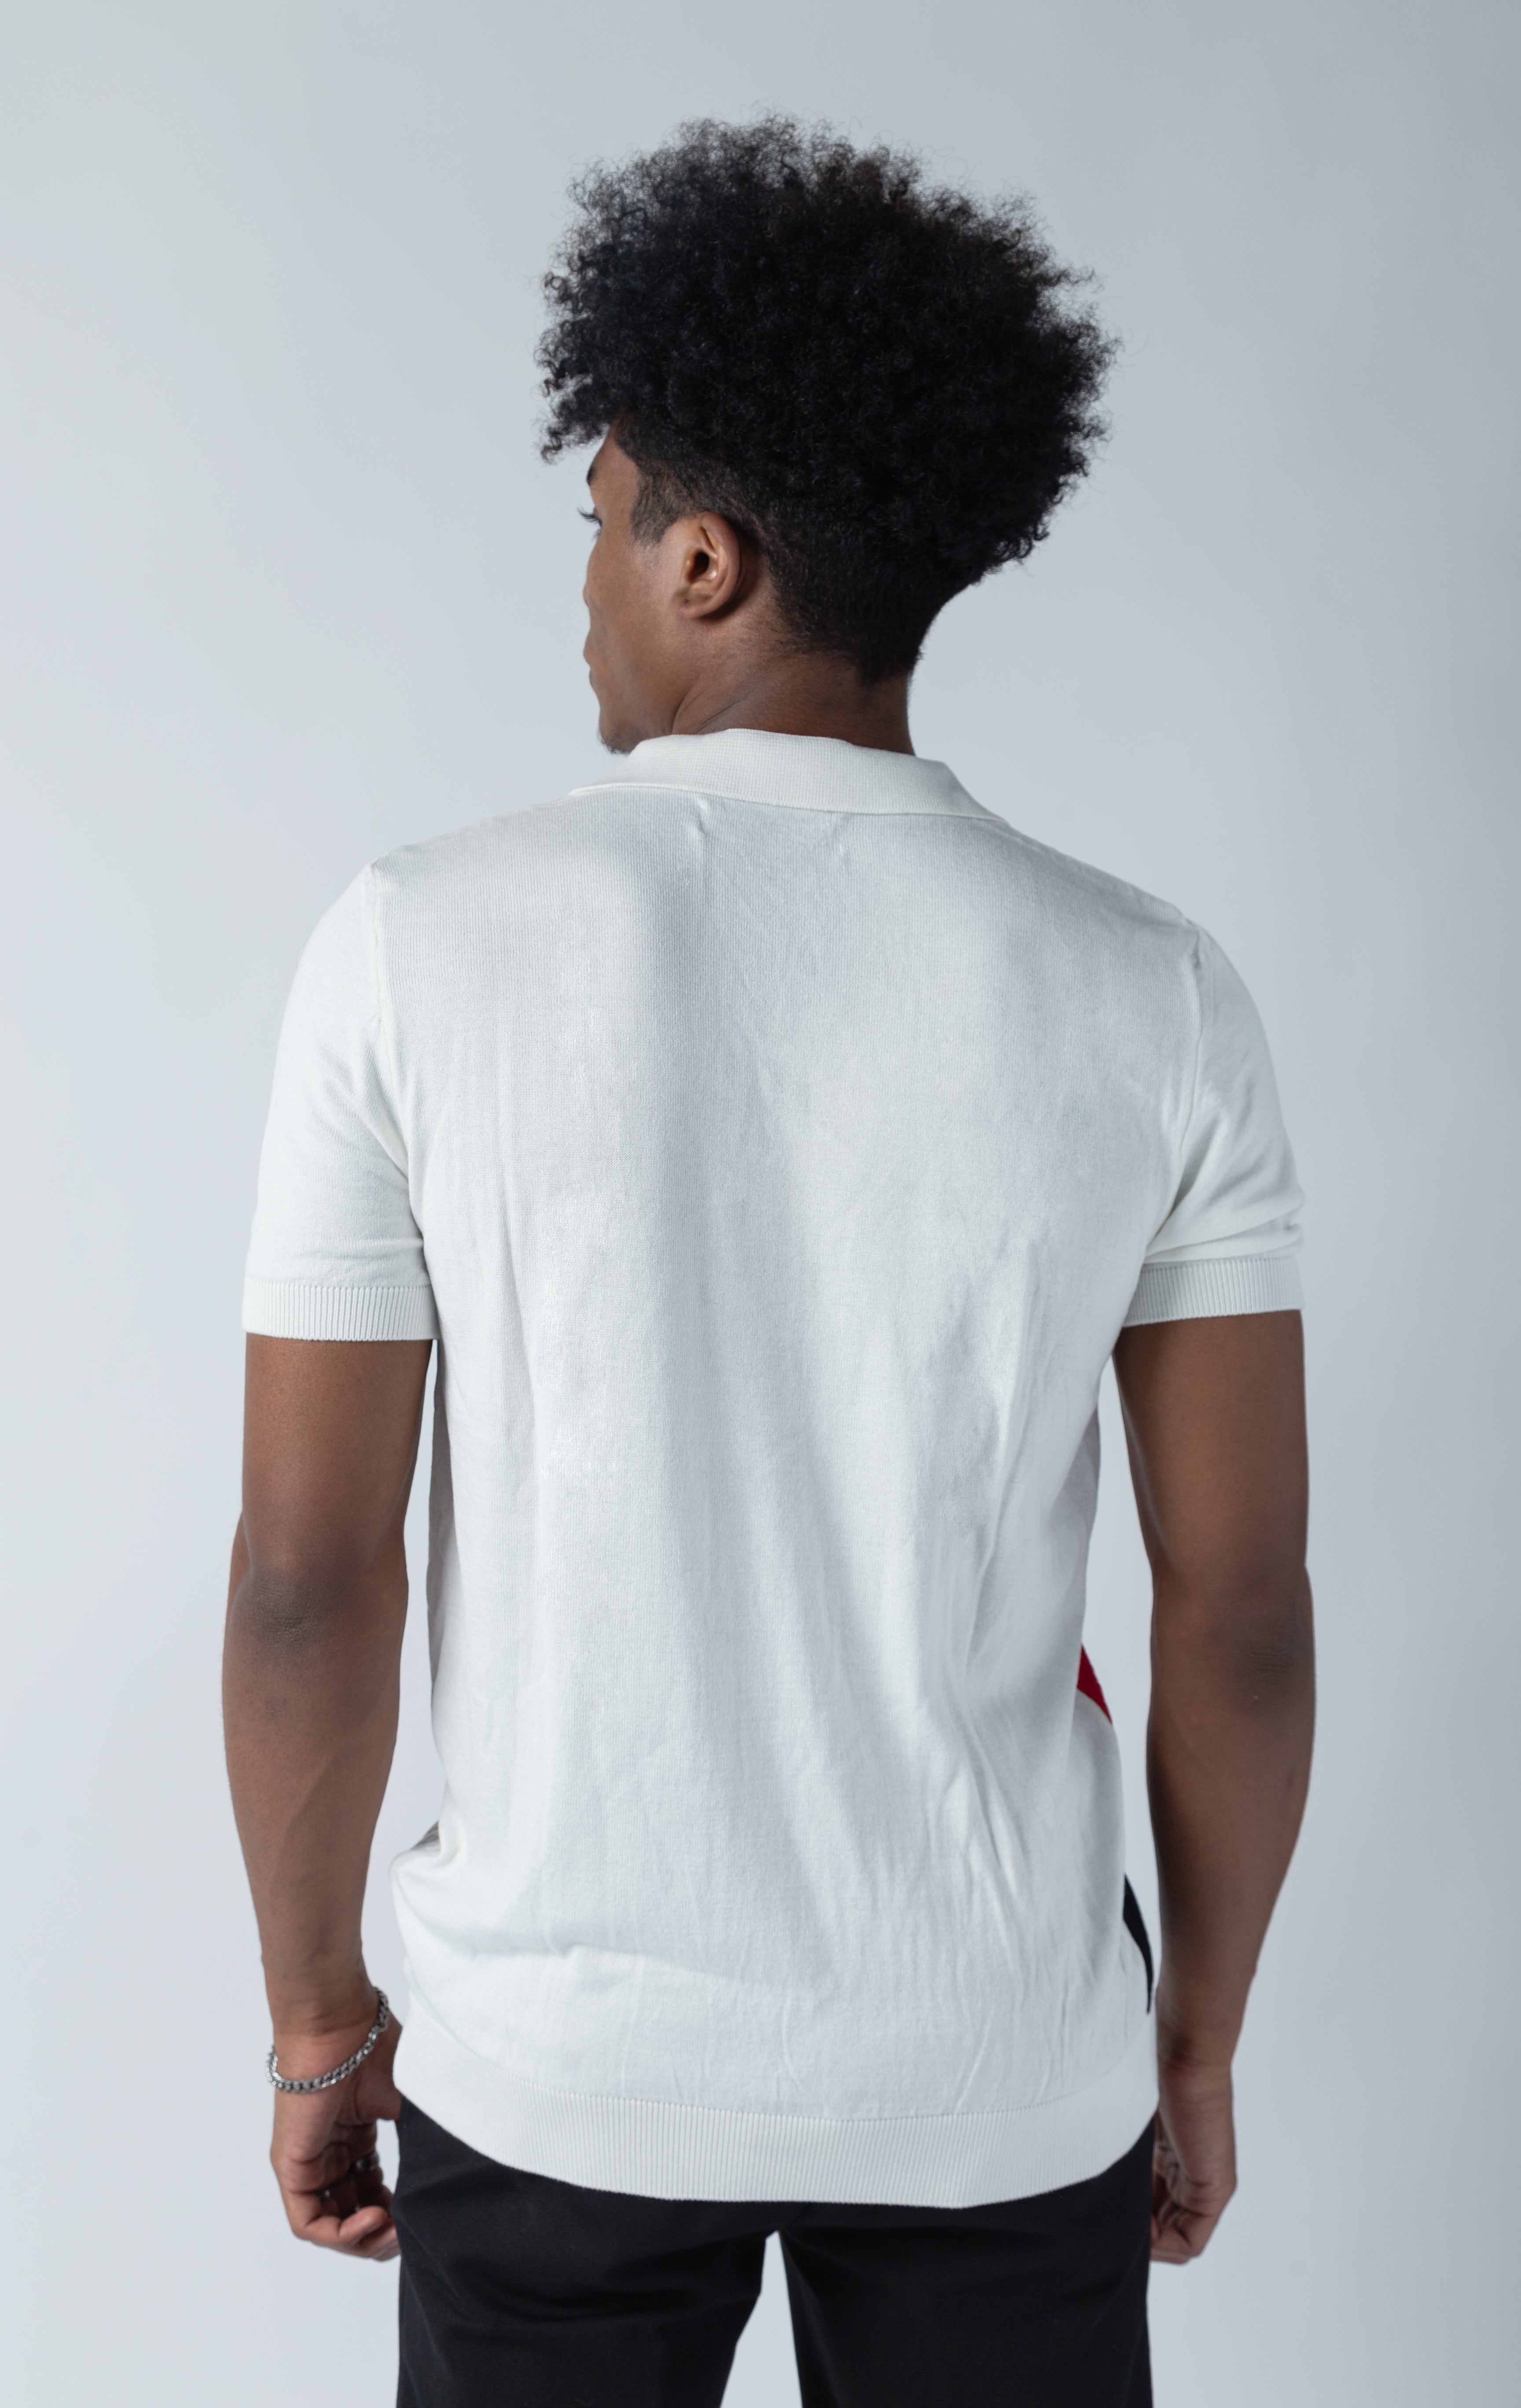 White v-neck polo shirt with a meticulously detailed button placket for an exclusive, stylish look.